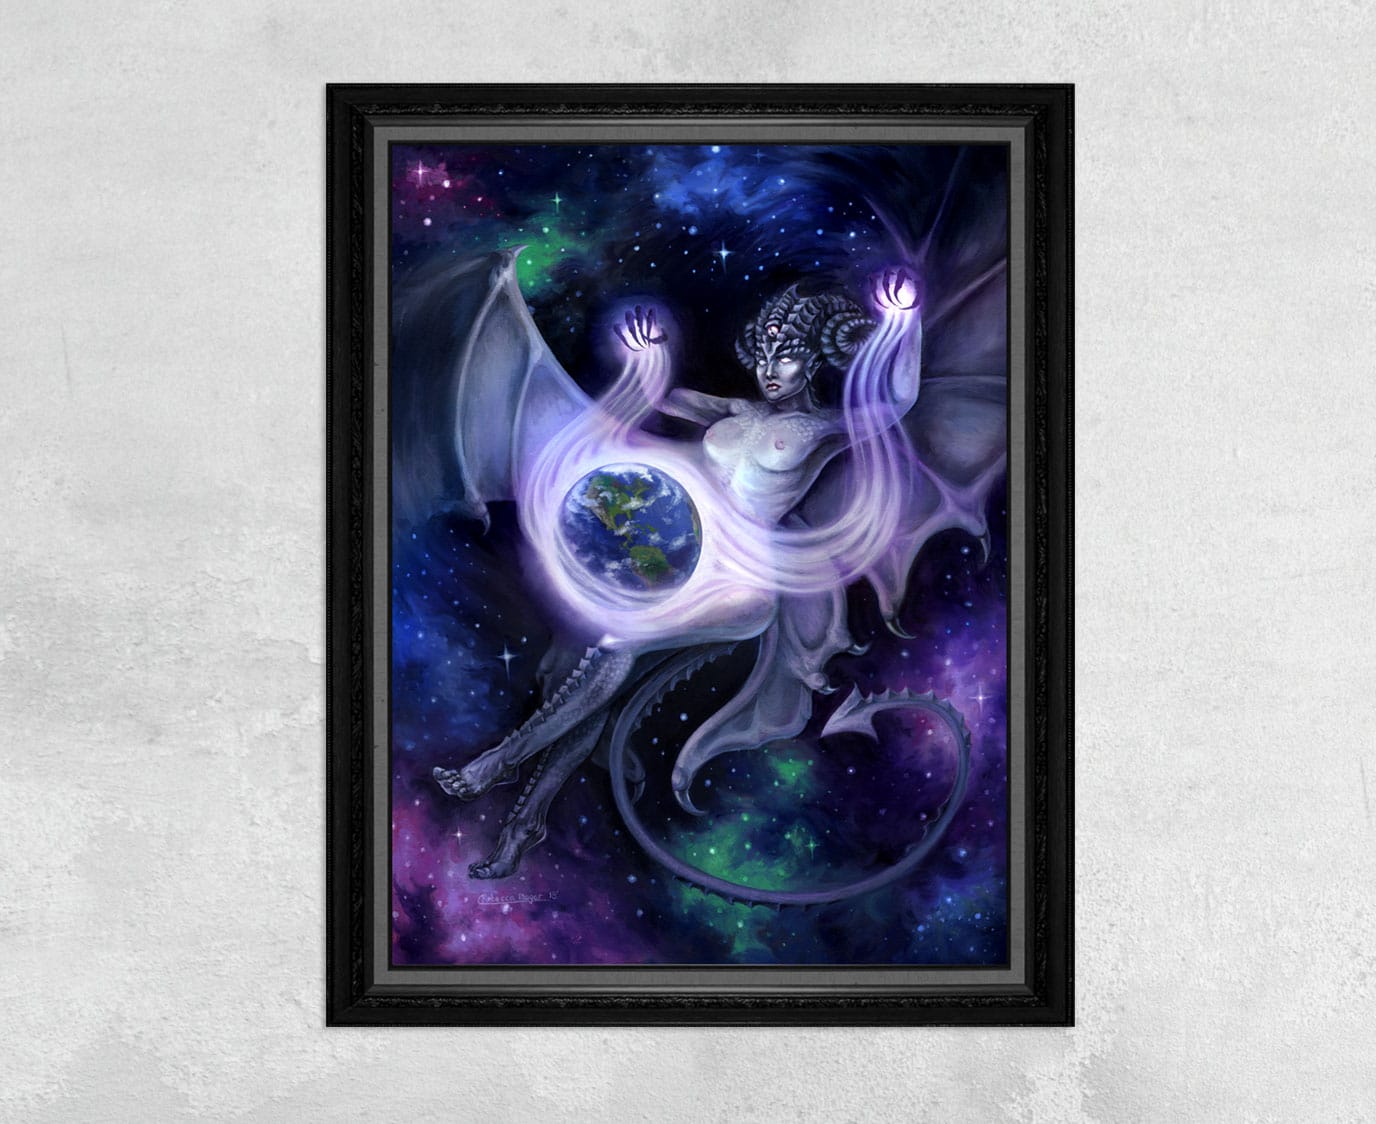 Otherworldly - Print of a Giant Space Faerie Casting a Spell on Planet Earth